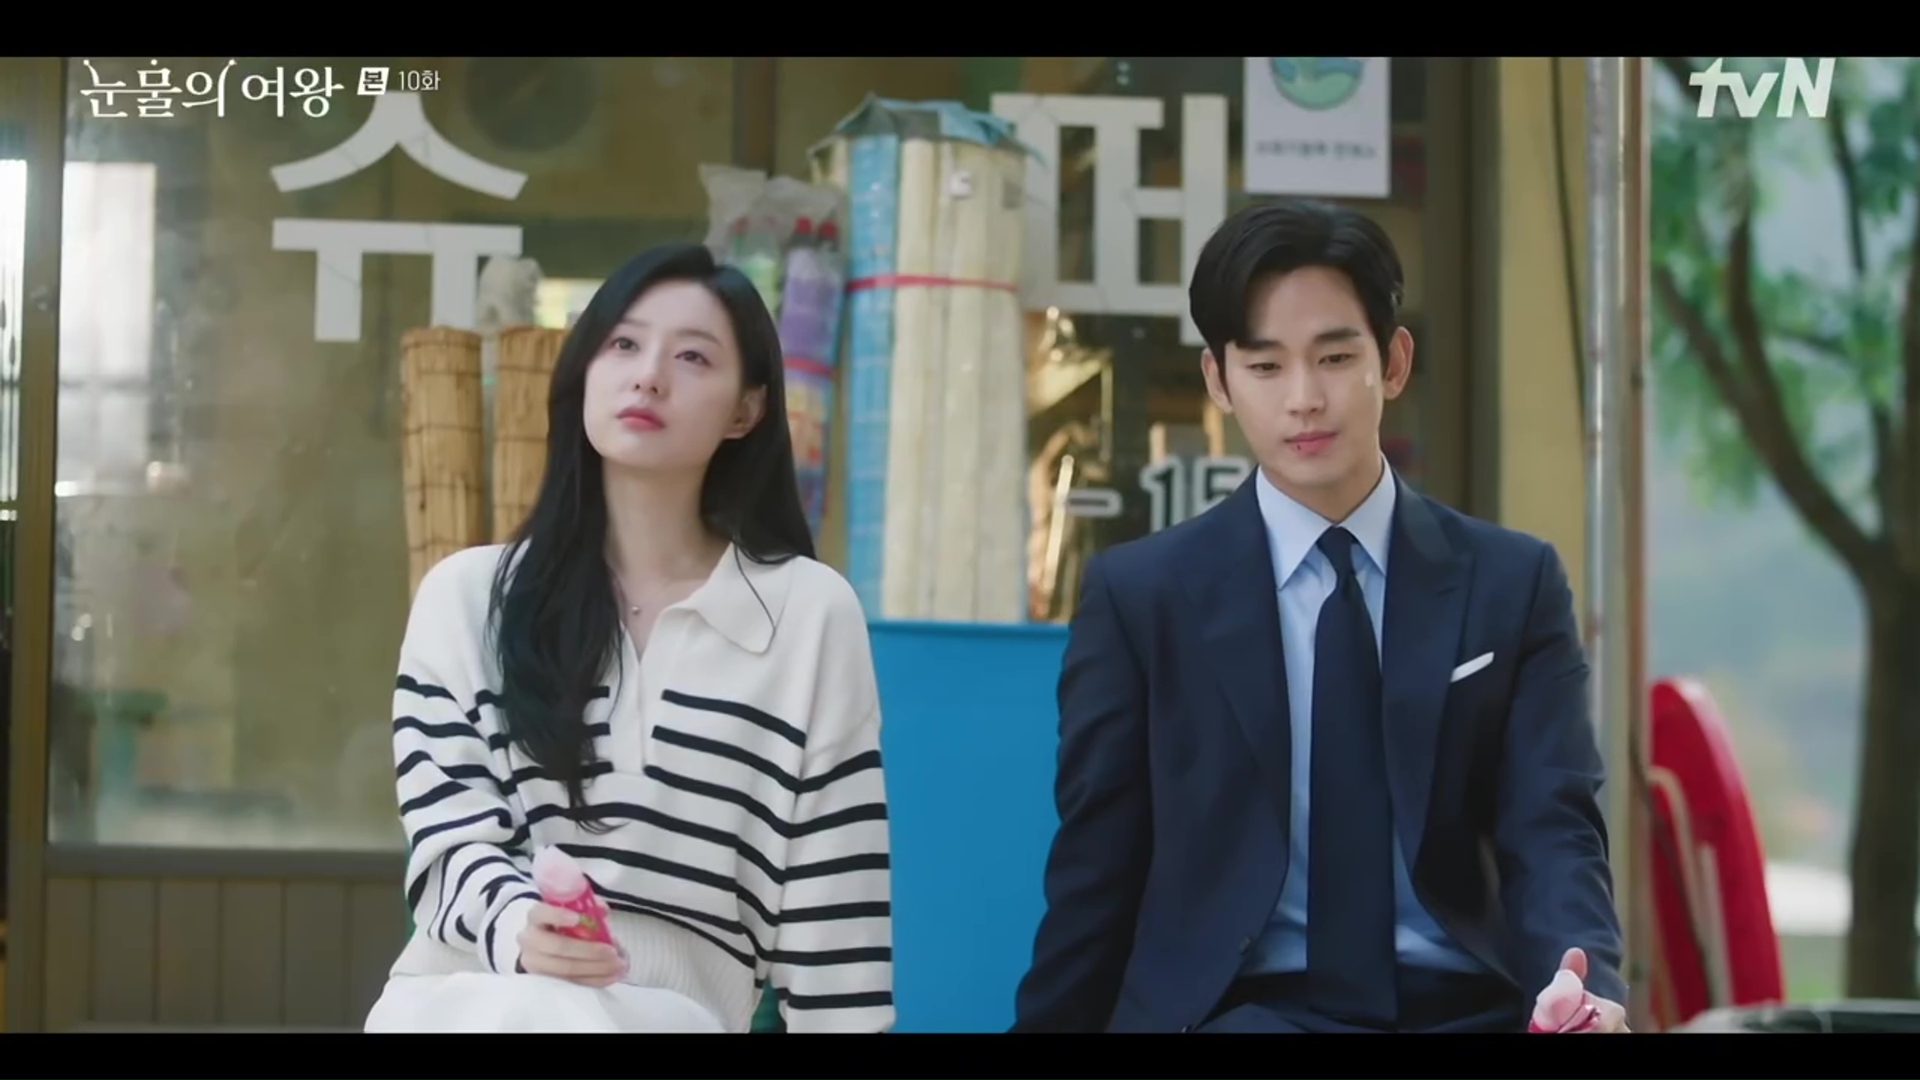 k-drama to watch Queen of tears image provided by dramabean. https://www.dramabeans.com/shows/queen-of-tears/